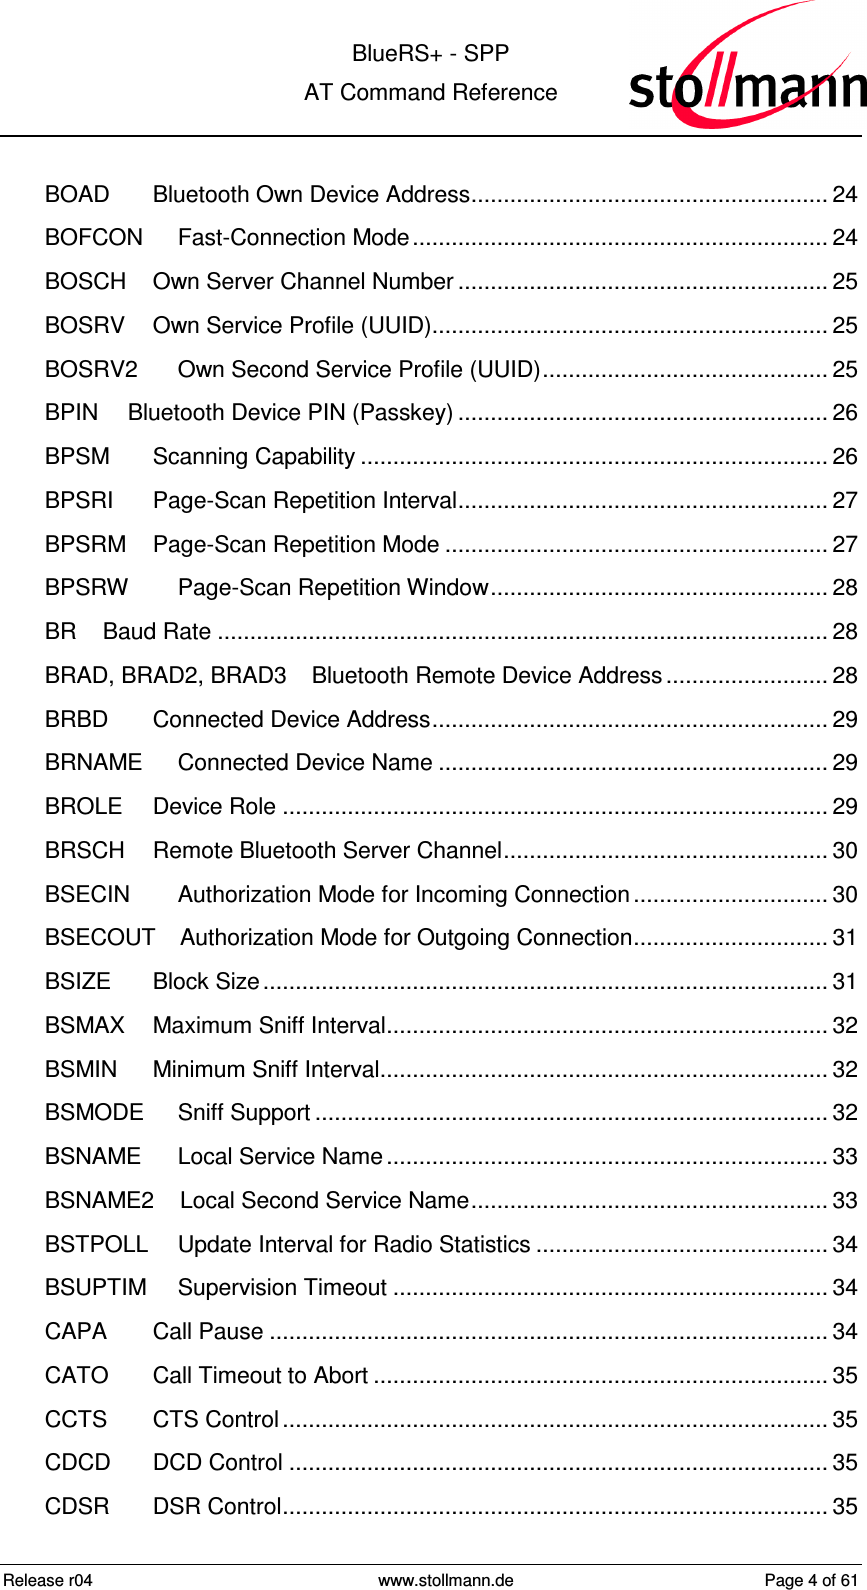  BlueRS+ - SPP AT Command Reference Release r04  www.stollmann.de  Page 4 of 61  BOAD Bluetooth Own Device Address....................................................... 24 BOFCON Fast-Connection Mode................................................................ 24 BOSCH Own Server Channel Number ......................................................... 25 BOSRV Own Service Profile (UUID)............................................................. 25 BOSRV2 Own Second Service Profile (UUID)............................................ 25 BPIN Bluetooth Device PIN (Passkey) ......................................................... 26 BPSM Scanning Capability ........................................................................ 26 BPSRI Page-Scan Repetition Interval......................................................... 27 BPSRM Page-Scan Repetition Mode ........................................................... 27 BPSRW Page-Scan Repetition Window.................................................... 28 BR Baud Rate .............................................................................................. 28 BRAD, BRAD2, BRAD3 Bluetooth Remote Device Address......................... 28 BRBD Connected Device Address............................................................. 29 BRNAME Connected Device Name ............................................................ 29 BROLE Device Role .................................................................................... 29 BRSCH Remote Bluetooth Server Channel.................................................. 30 BSECIN Authorization Mode for Incoming Connection.............................. 30 BSECOUT Authorization Mode for Outgoing Connection.............................. 31 BSIZE Block Size....................................................................................... 31 BSMAX Maximum Sniff Interval.................................................................... 32 BSMIN Minimum Sniff Interval..................................................................... 32 BSMODE Sniff Support ............................................................................... 32 BSNAME Local Service Name.................................................................... 33 BSNAME2 Local Second Service Name....................................................... 33 BSTPOLL Update Interval for Radio Statistics ............................................. 34 BSUPTIM Supervision Timeout ................................................................... 34 CAPA Call Pause ...................................................................................... 34 CATO Call Timeout to Abort ...................................................................... 35 CCTS CTS Control.................................................................................... 35 CDCD DCD Control ................................................................................... 35 CDSR DSR Control.................................................................................... 35 